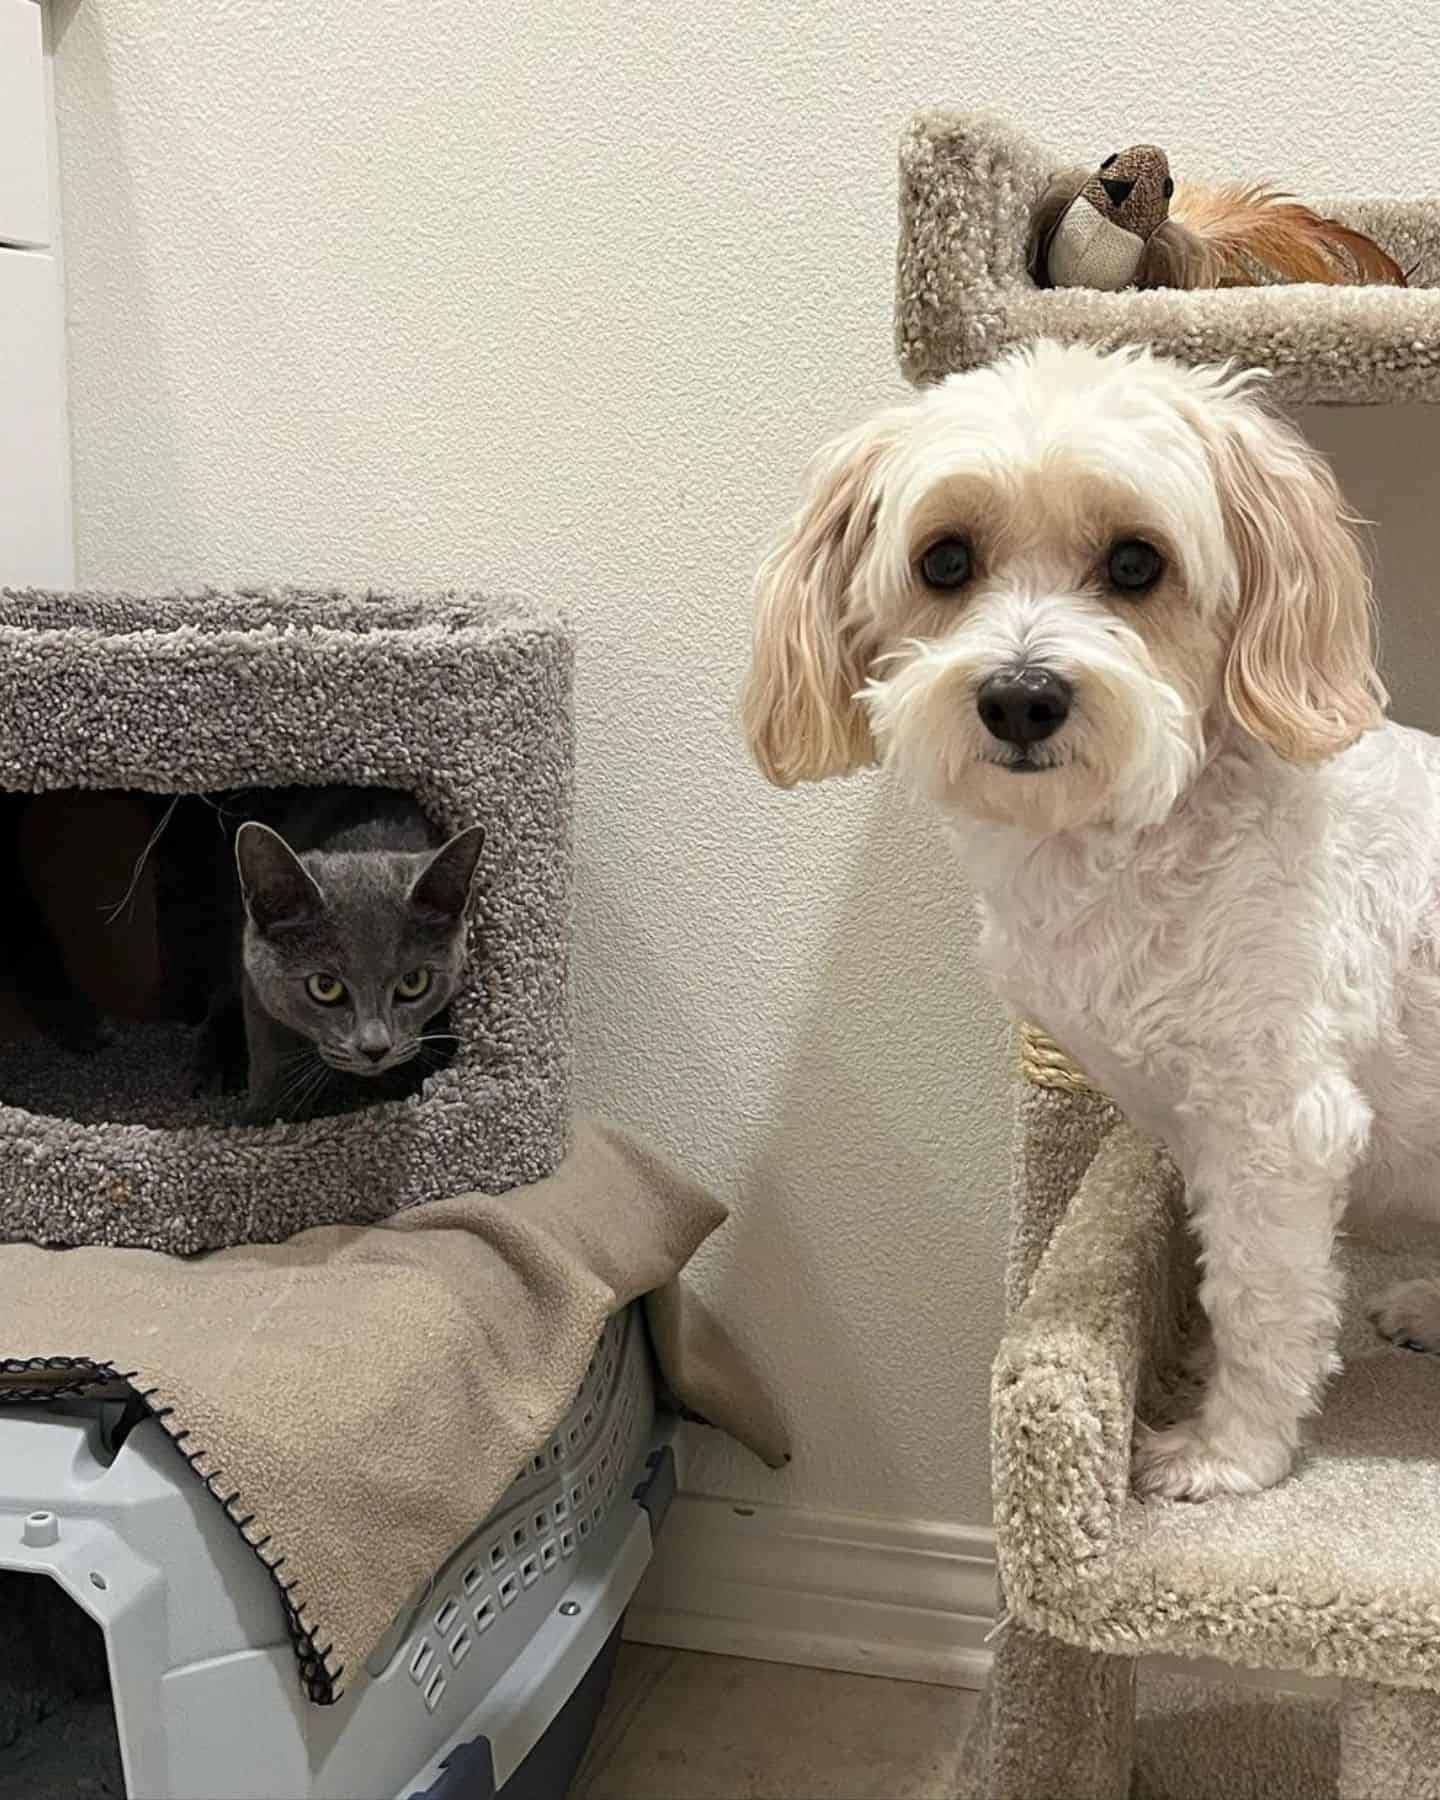 cat and dog in a house